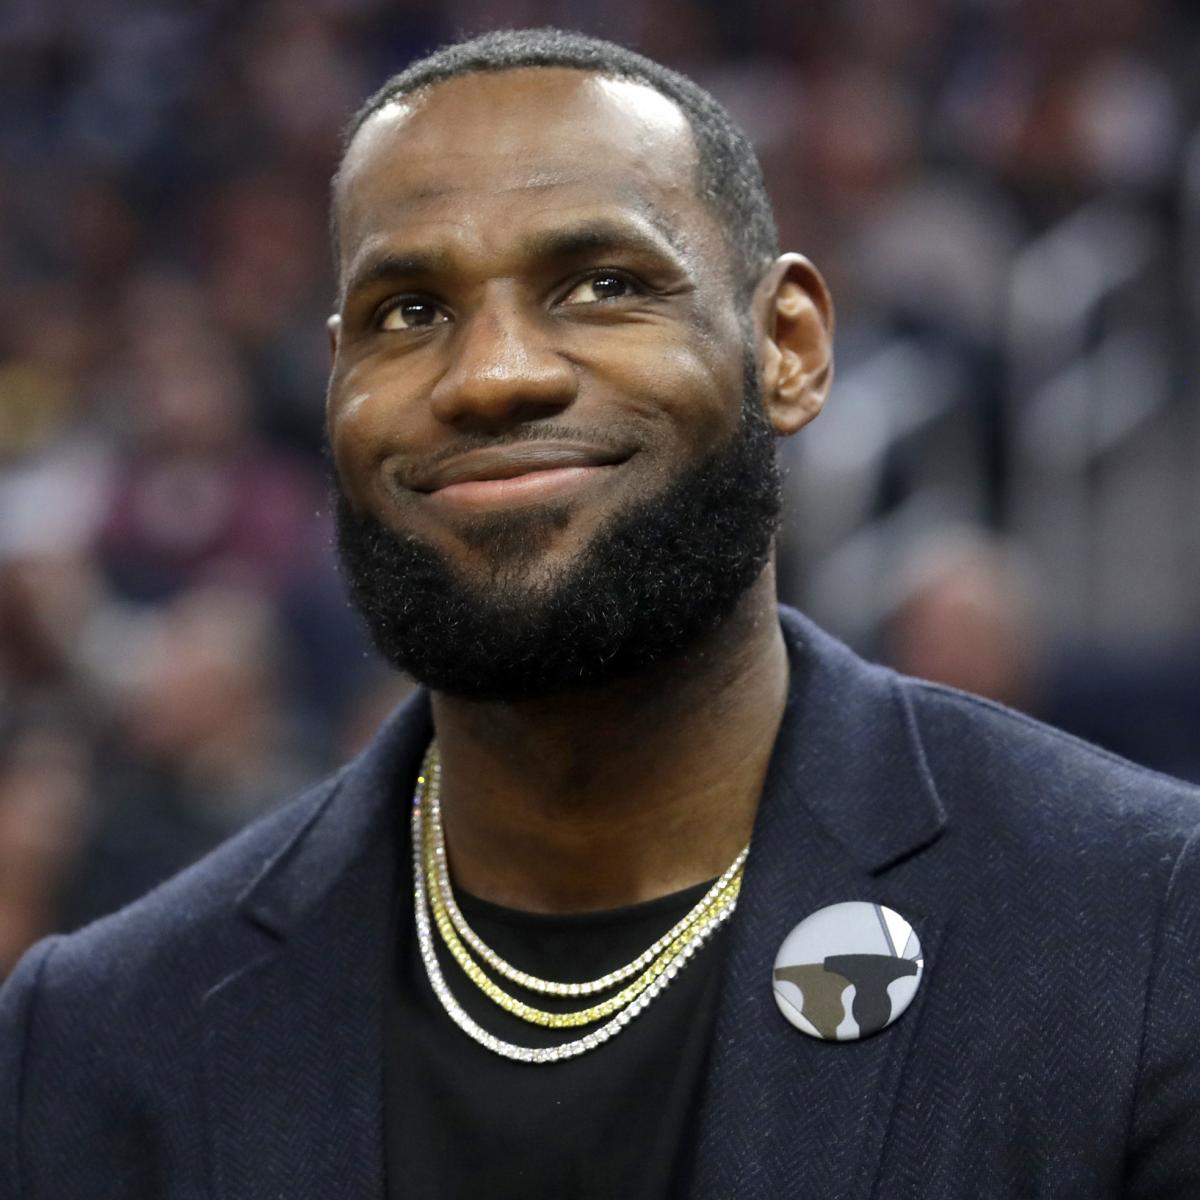 LeBron James, Trae Young, More Create Voting Rights Group Ahead of 2020